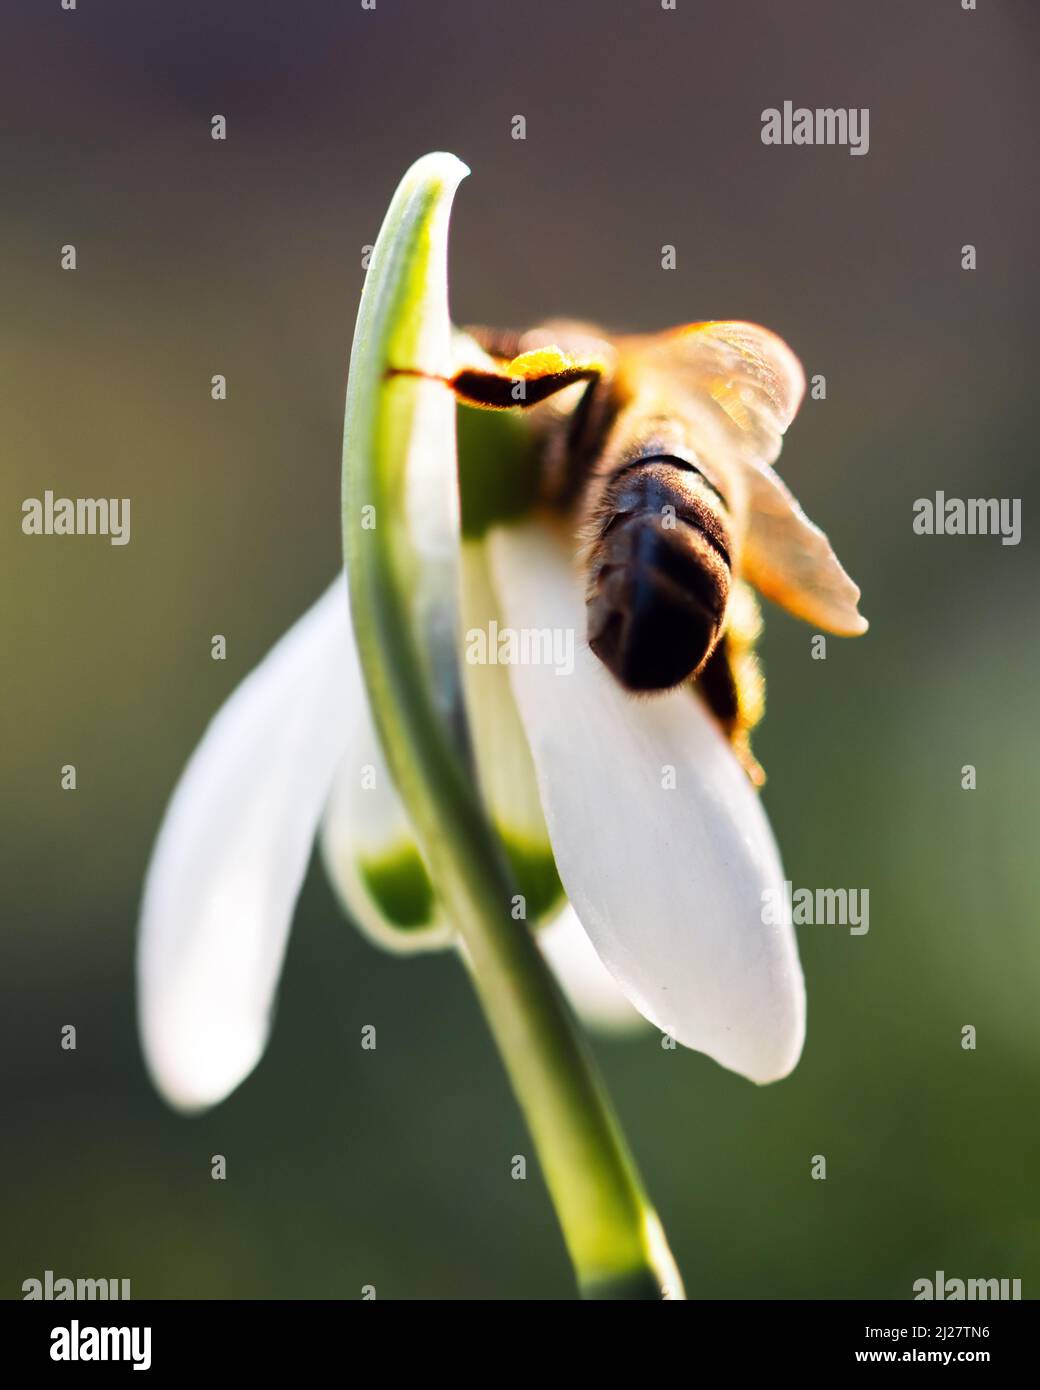 A working bee collecting pollen on a white snowdrop flower on spring meadow. Macro photography Stock Photo